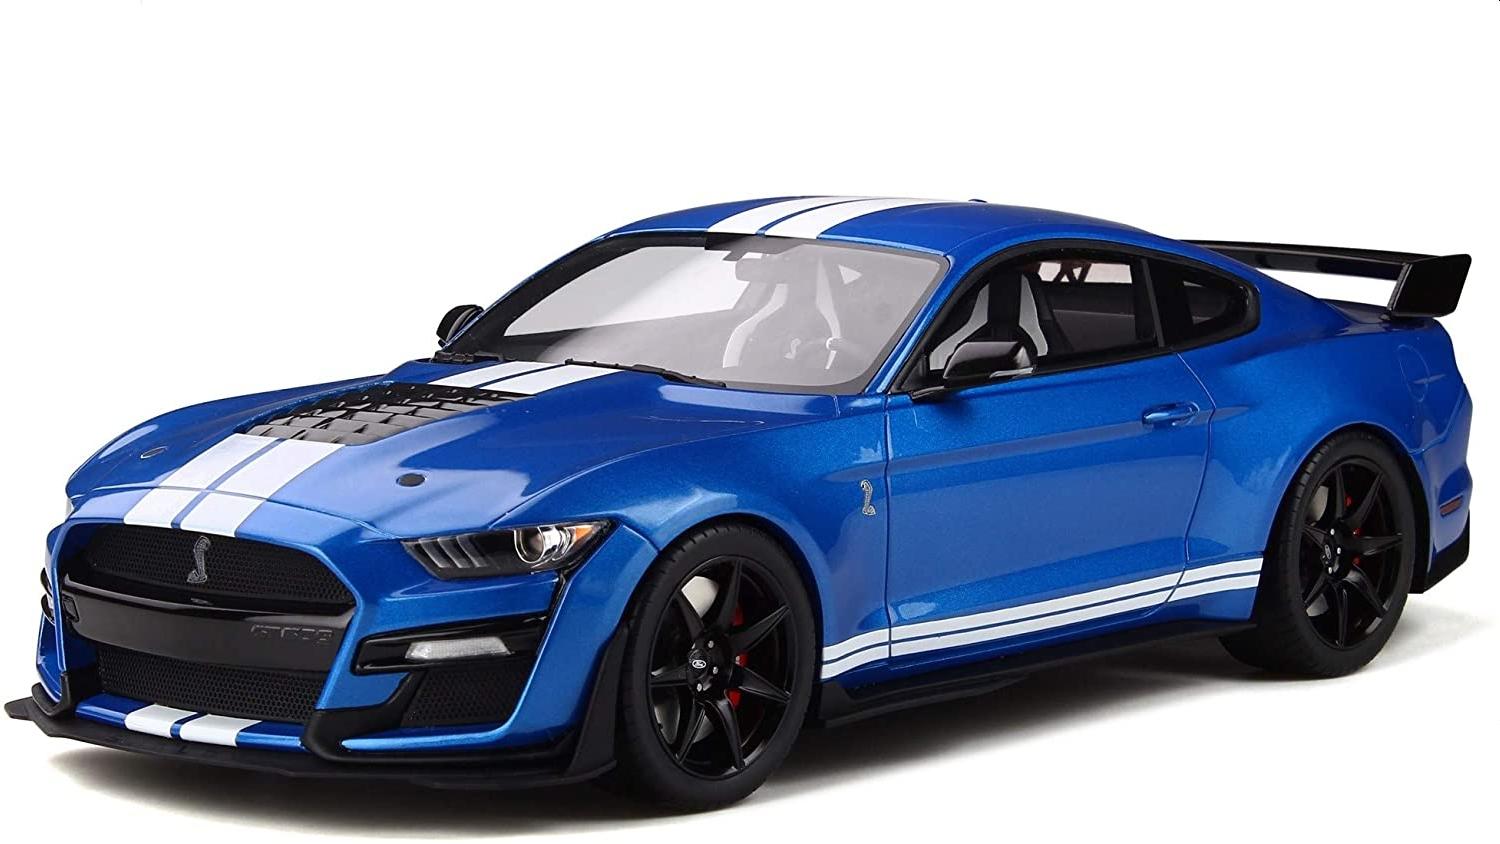 Ford Mustang Shelby GT500 2020 in metallic blue 1:18 scale model from Maisto